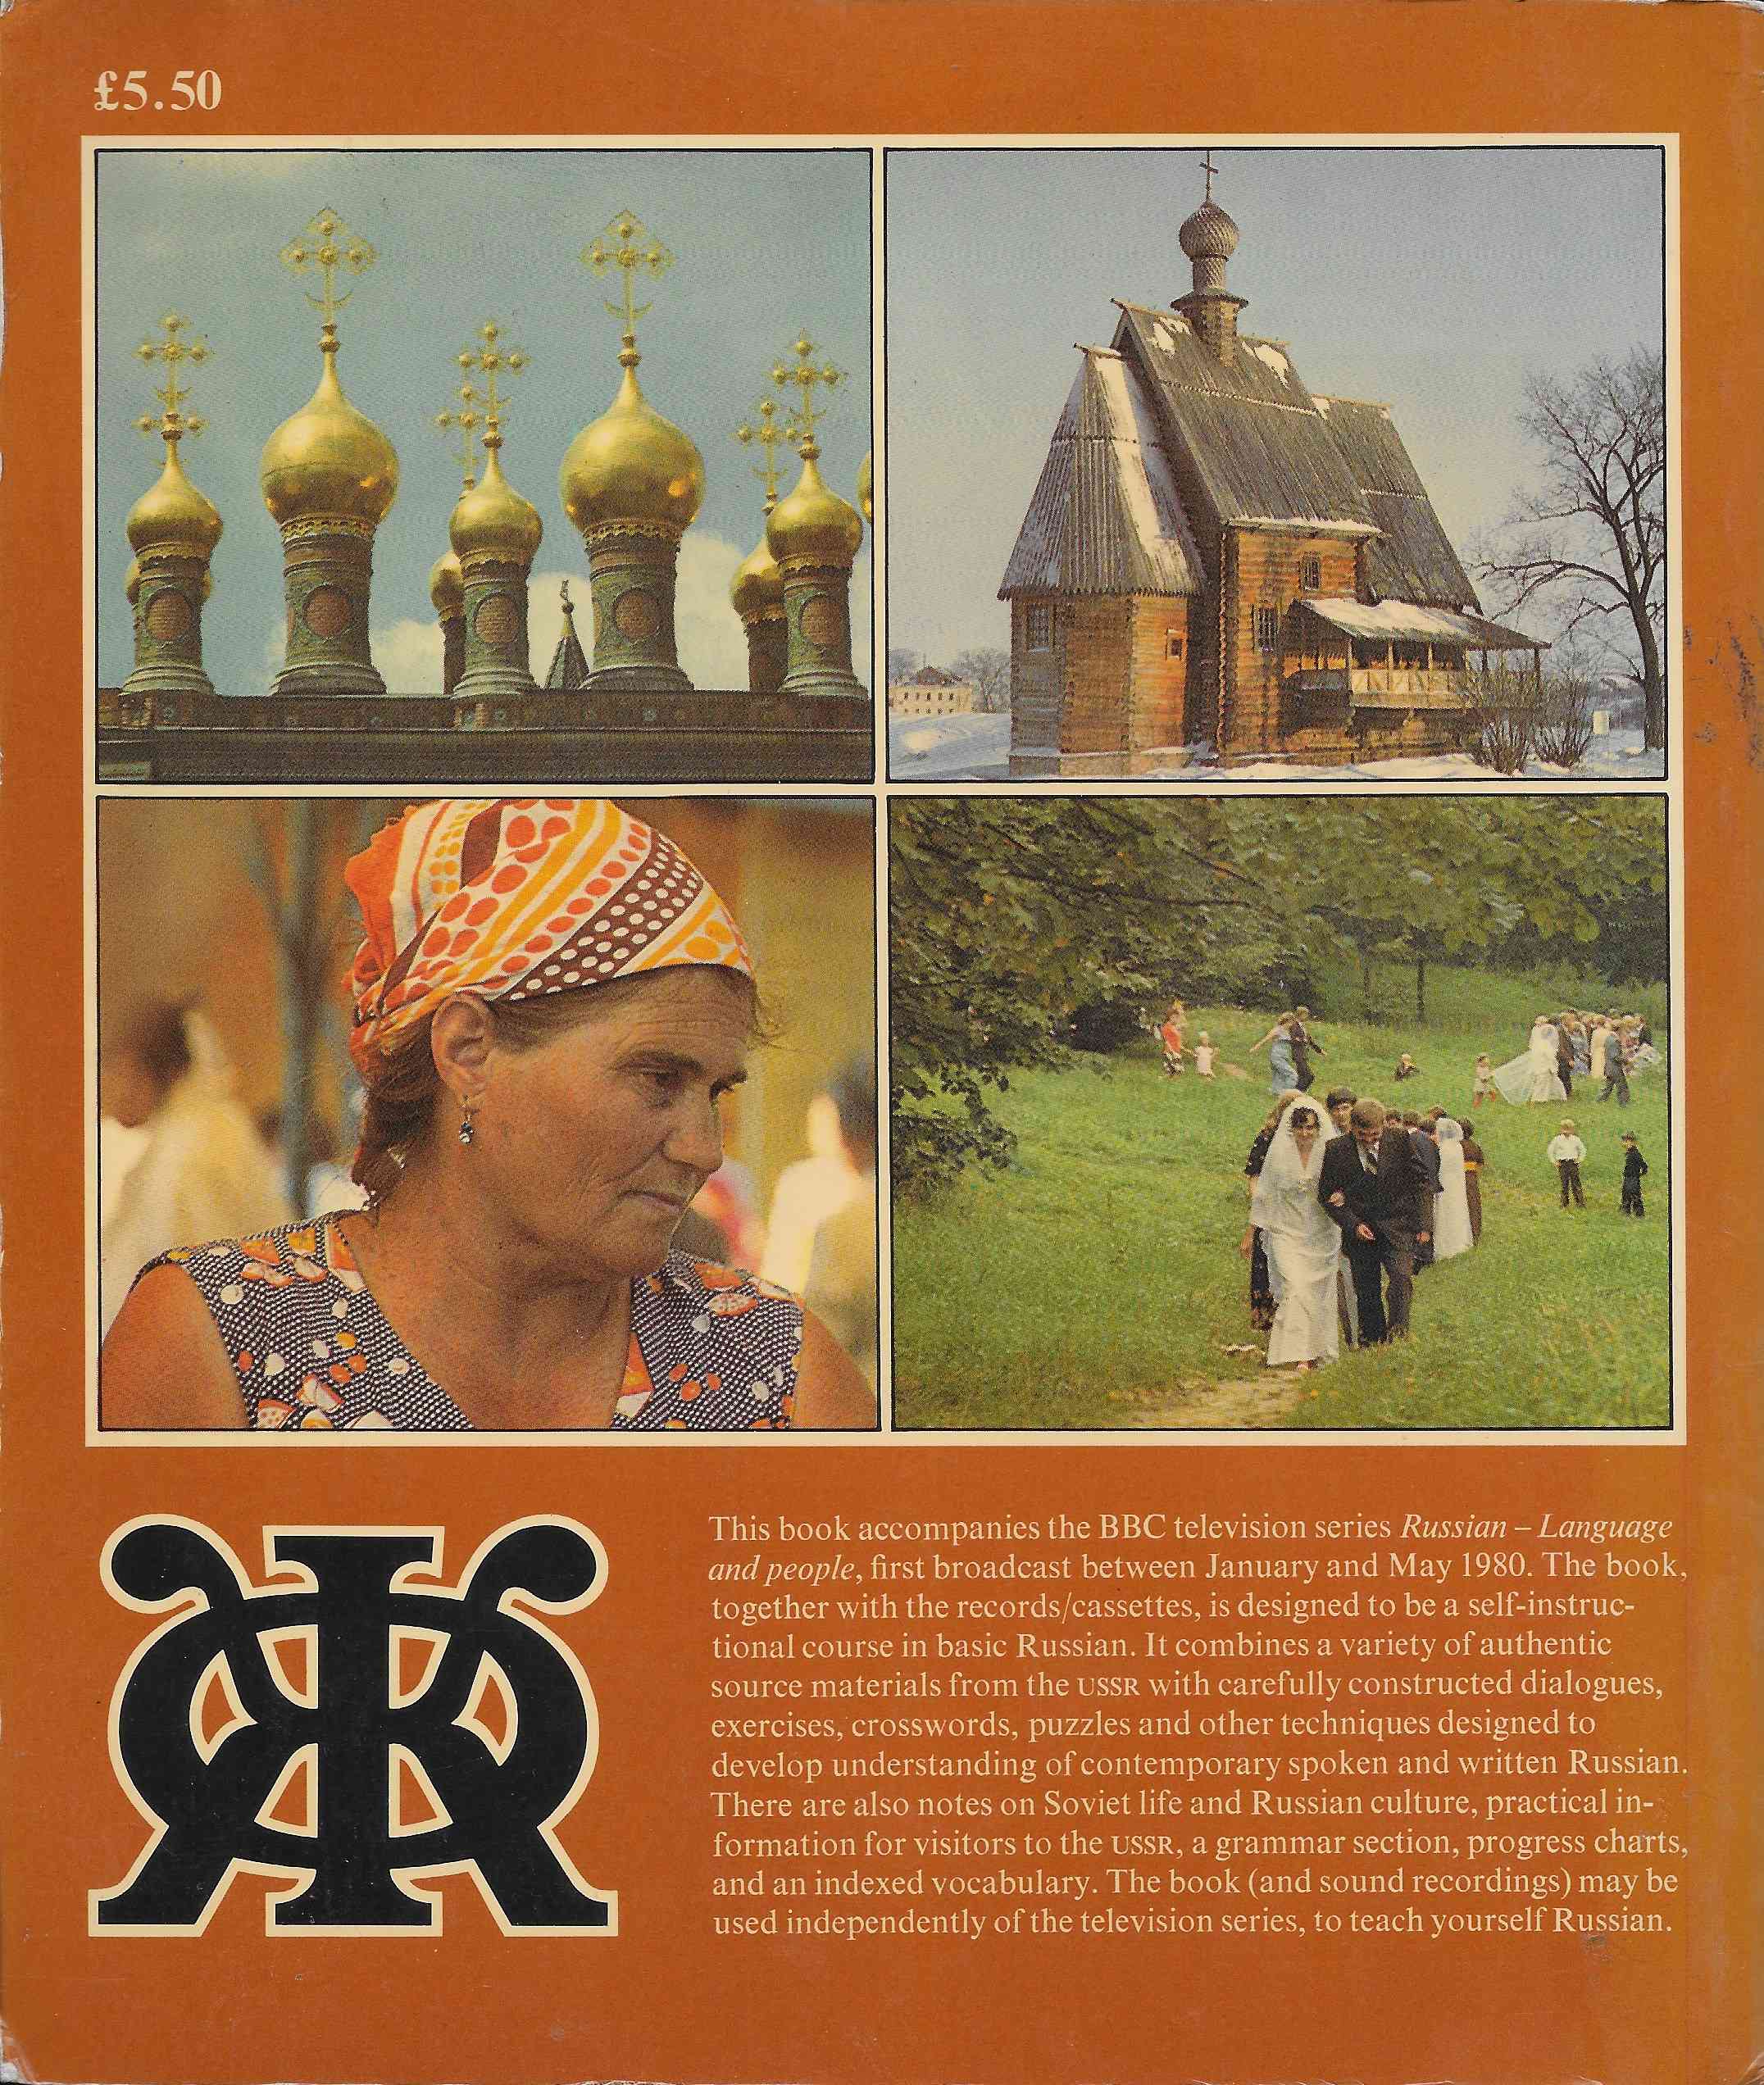 Picture of ISBN 0 563 16303 8 Russian language and people by artist Terry Culhane from the BBC records and Tapes library